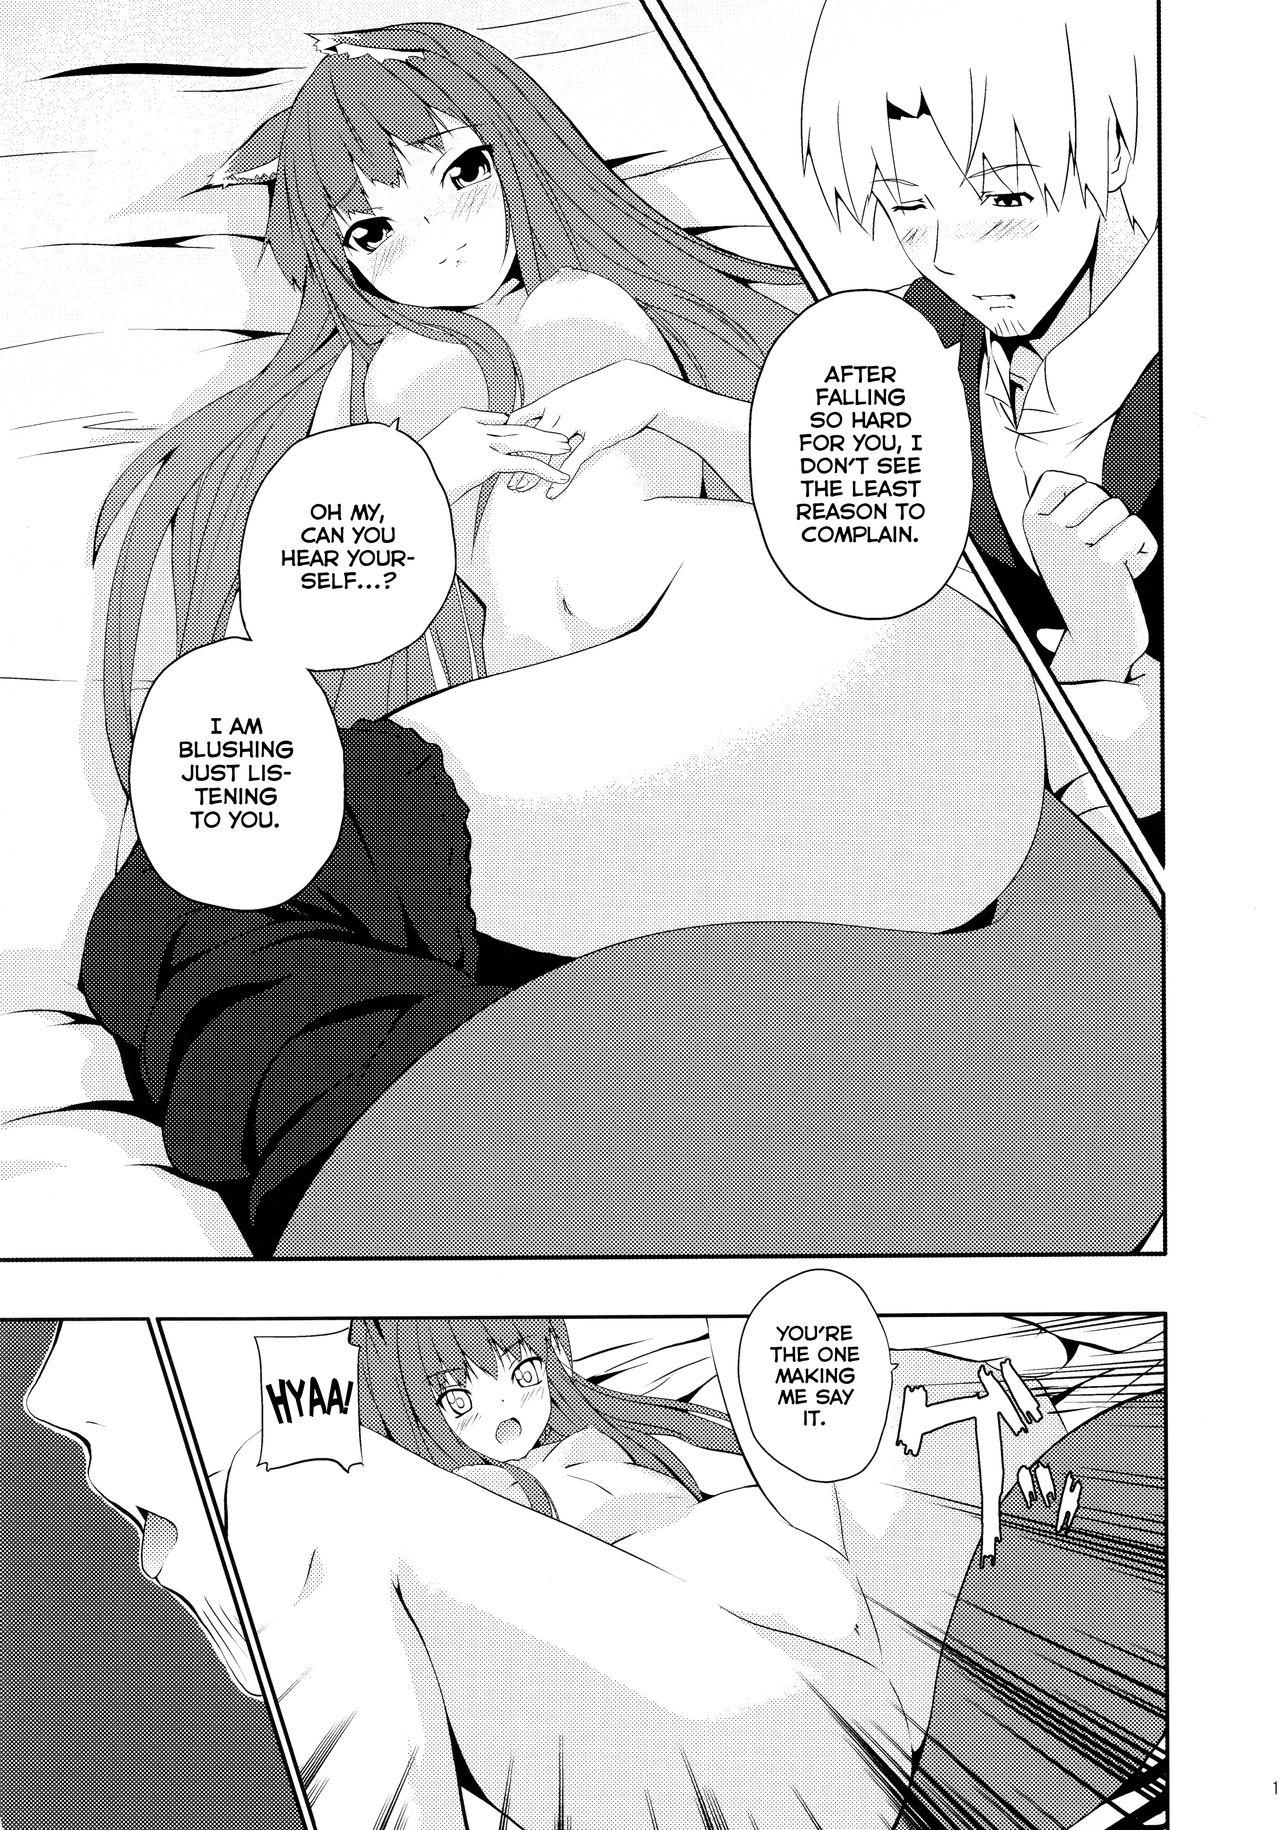 Family Taboo Bitter Apple - Spice and wolf Gay Group - Page 13